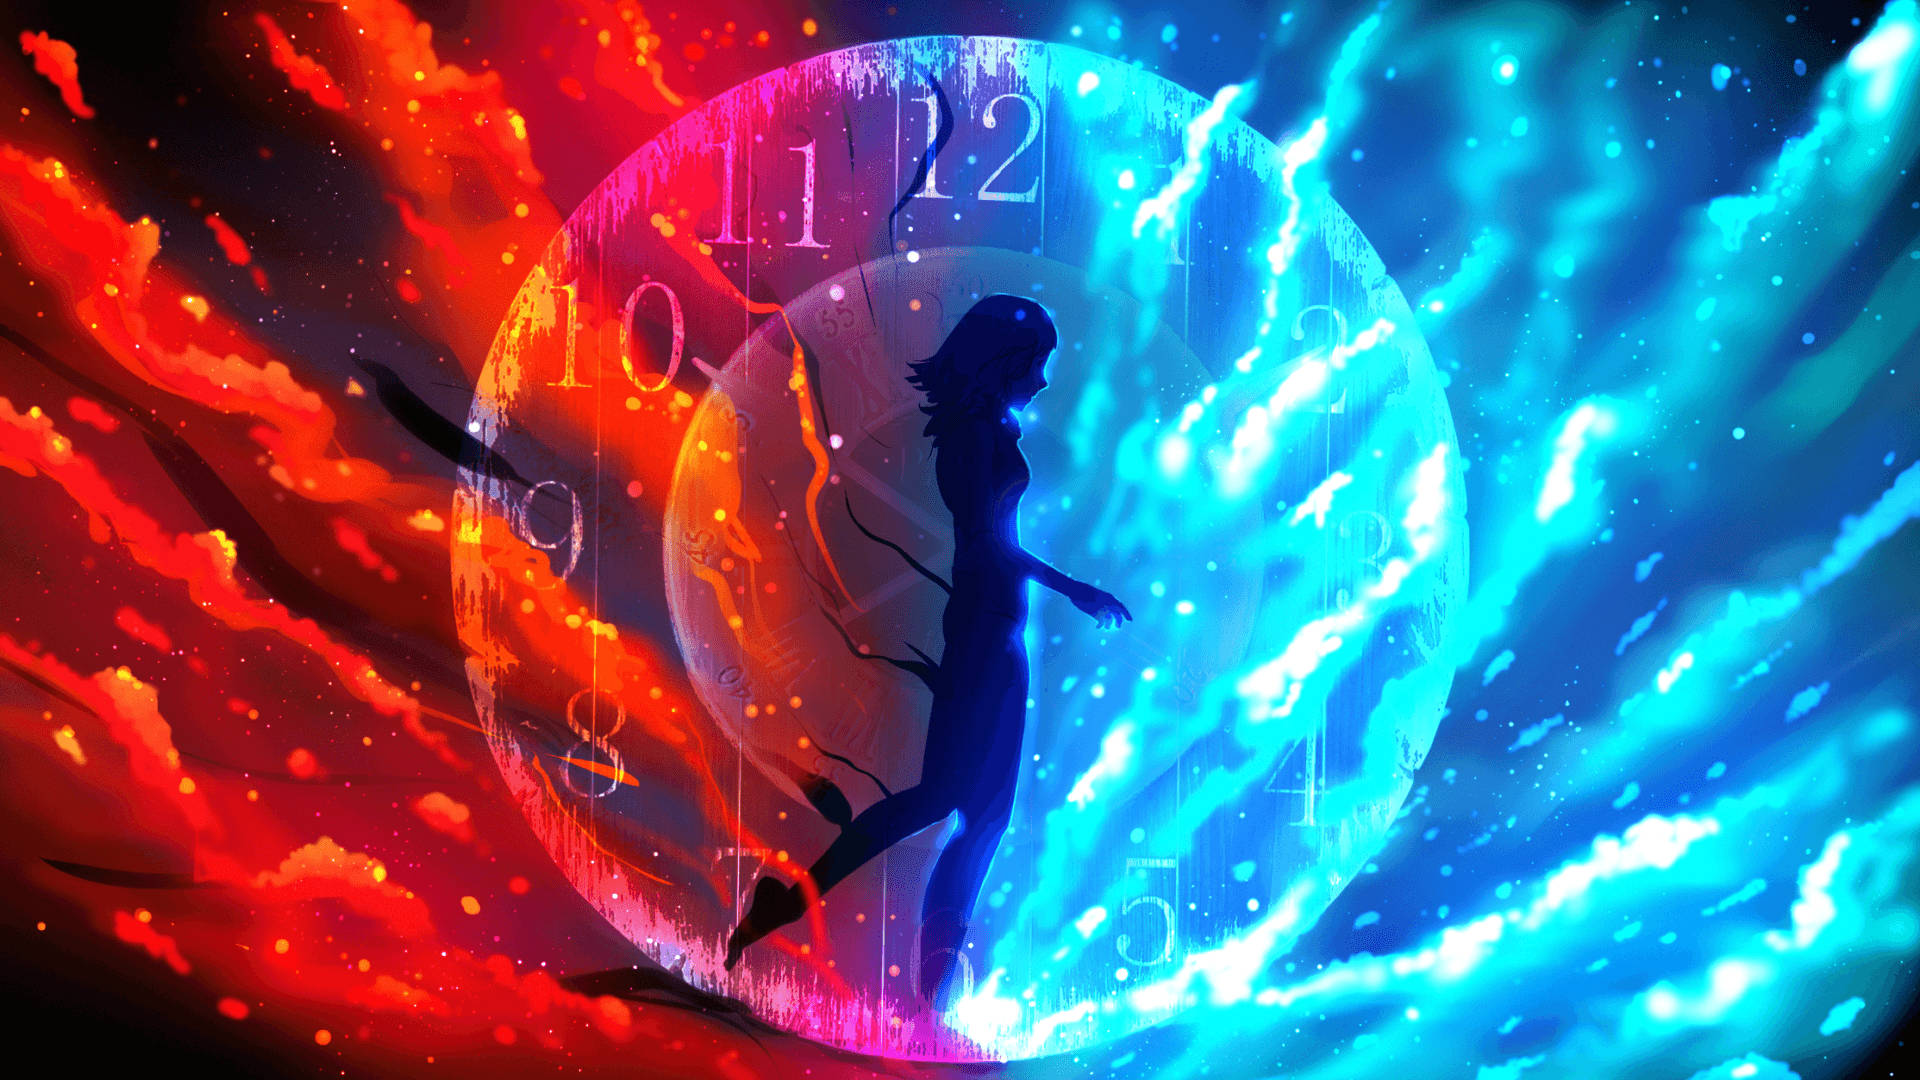 Download Red And Blue Fire Anime Clock Wallpaper 